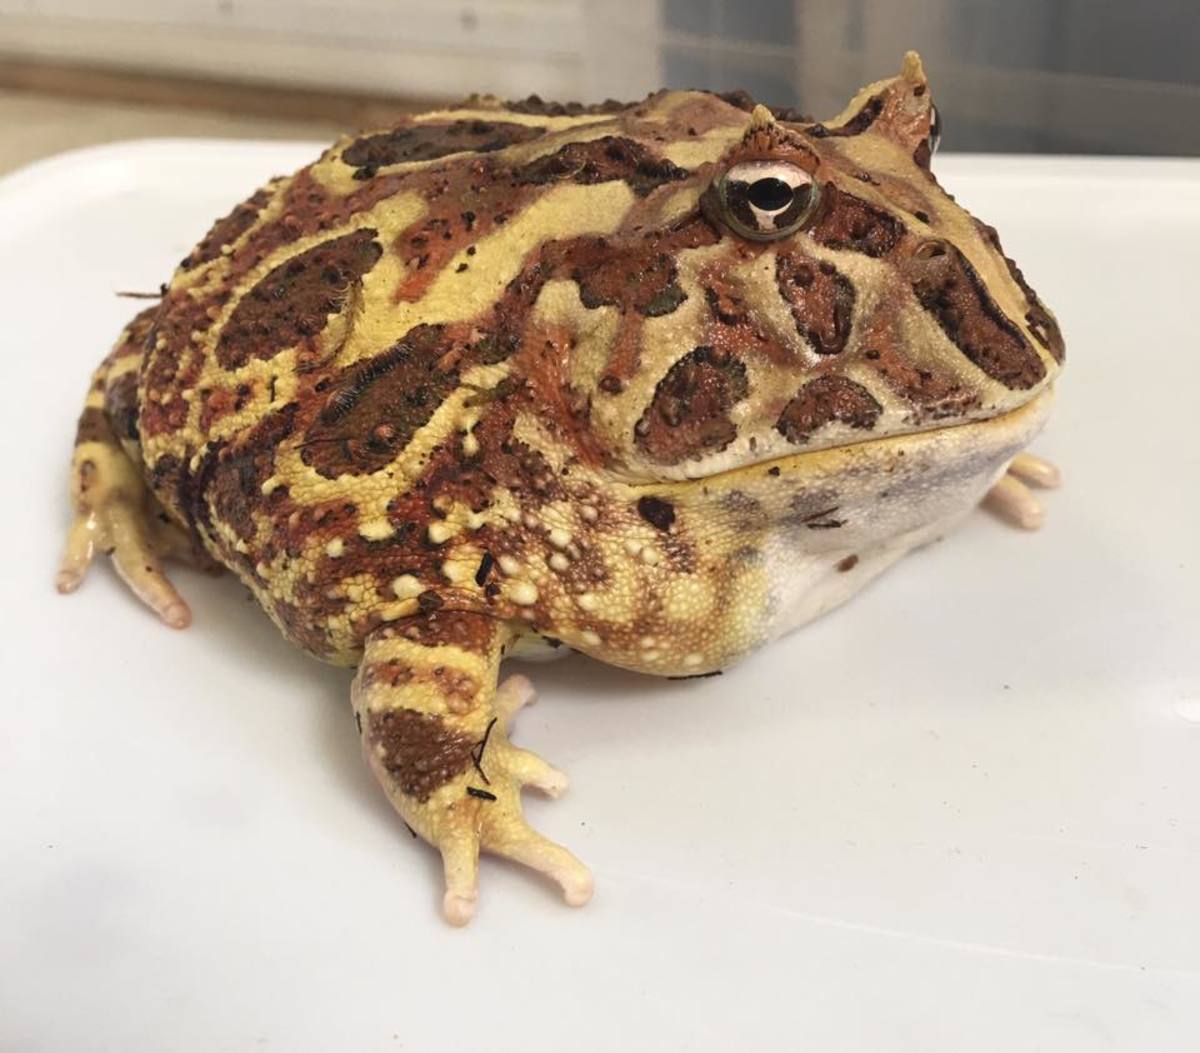 Pacman frogs' diets change as they grow.